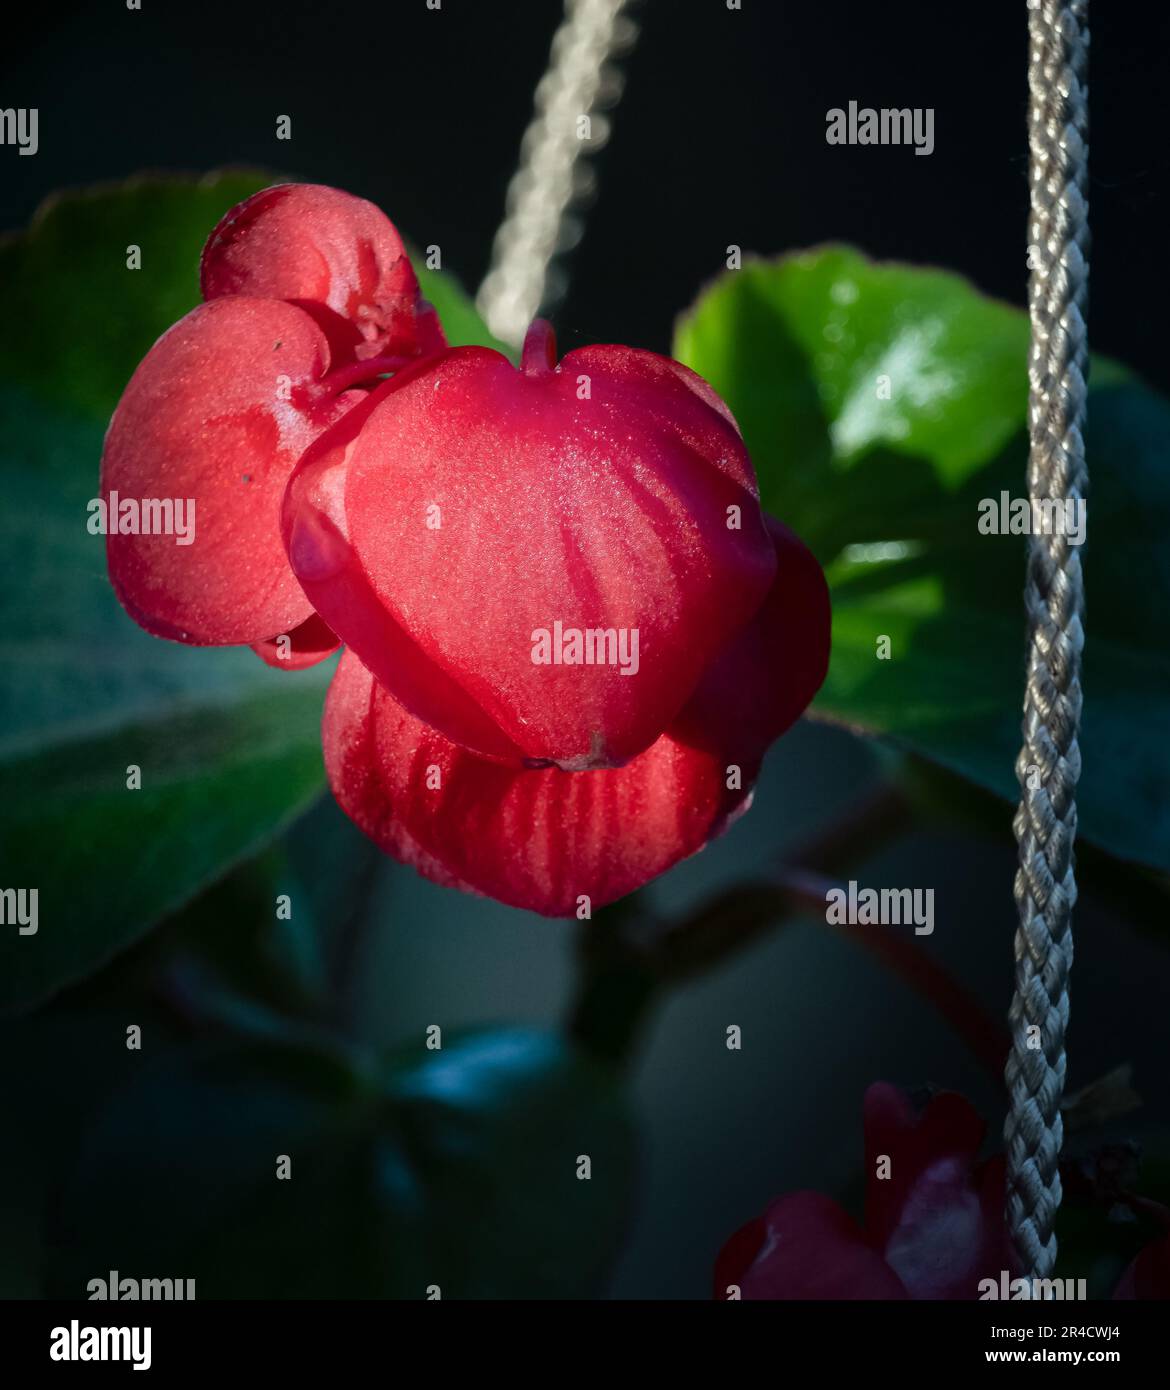 A solitary red wax begonia, Begonia cuculluta, in the sun with a leafy green and dark vignette background in spring or summer, Lancaster, Pennsylvania Stock Photo